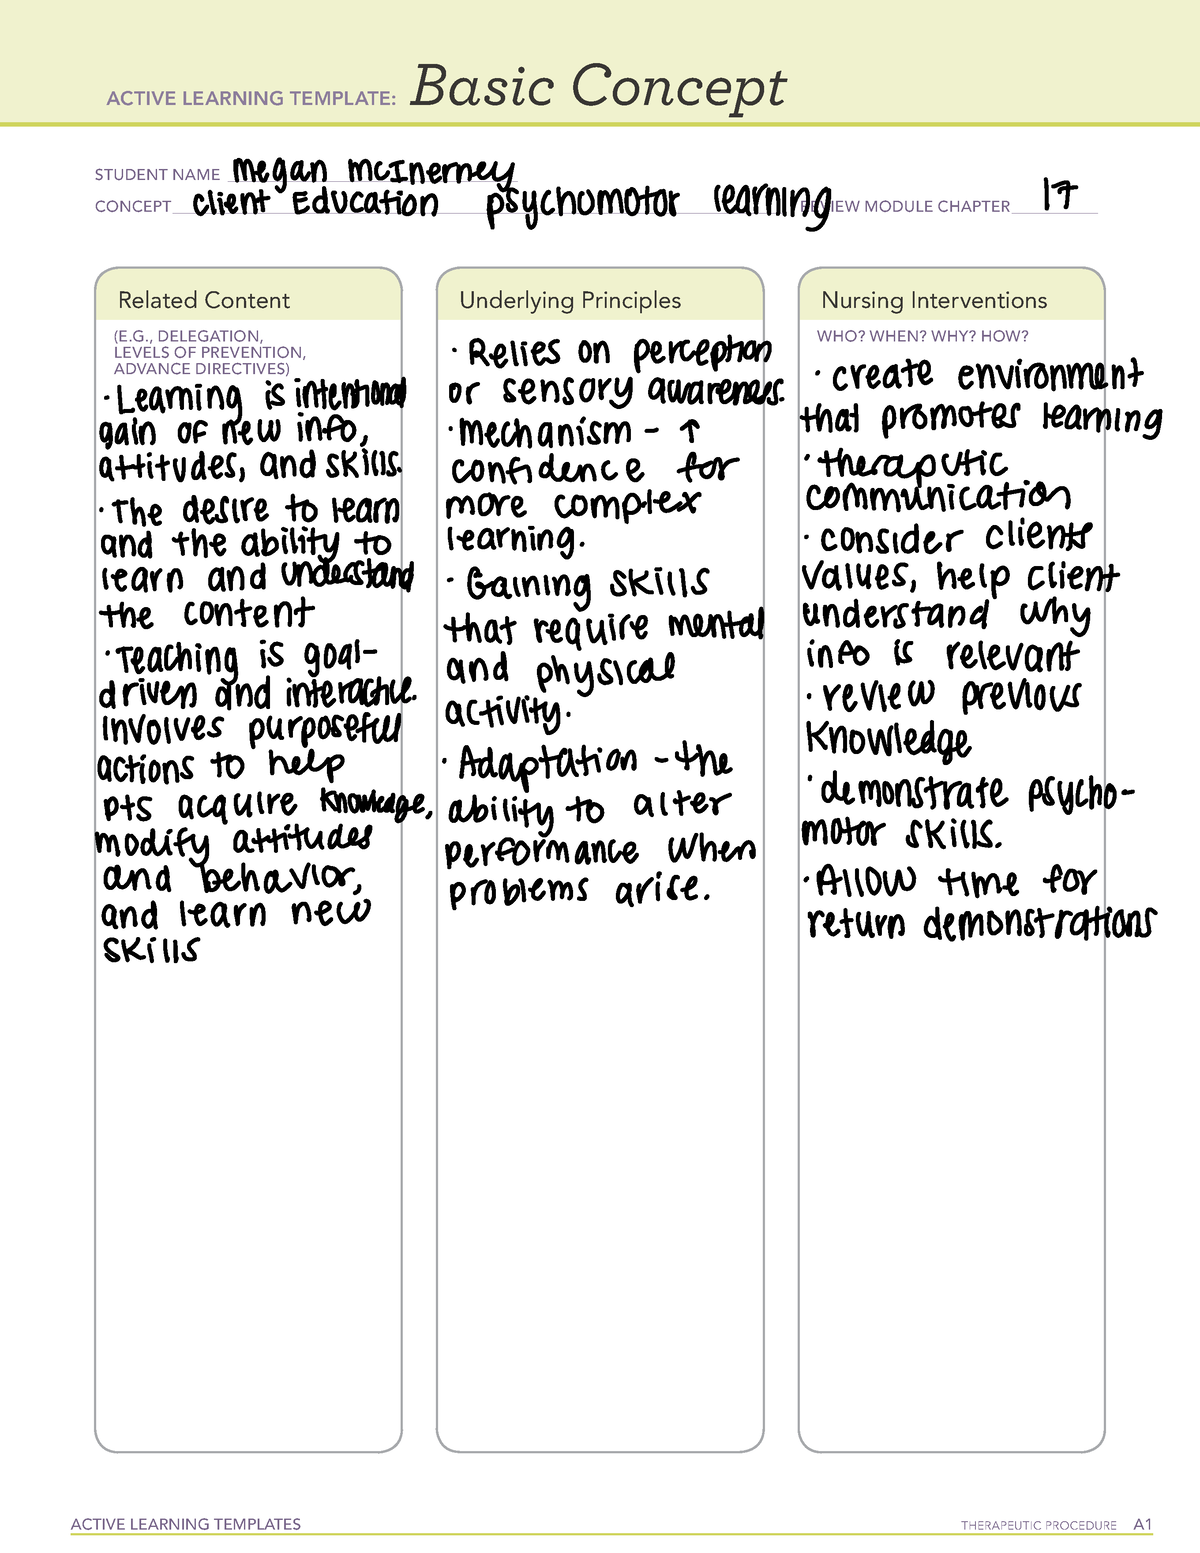 Basic Concept Active Learning Template